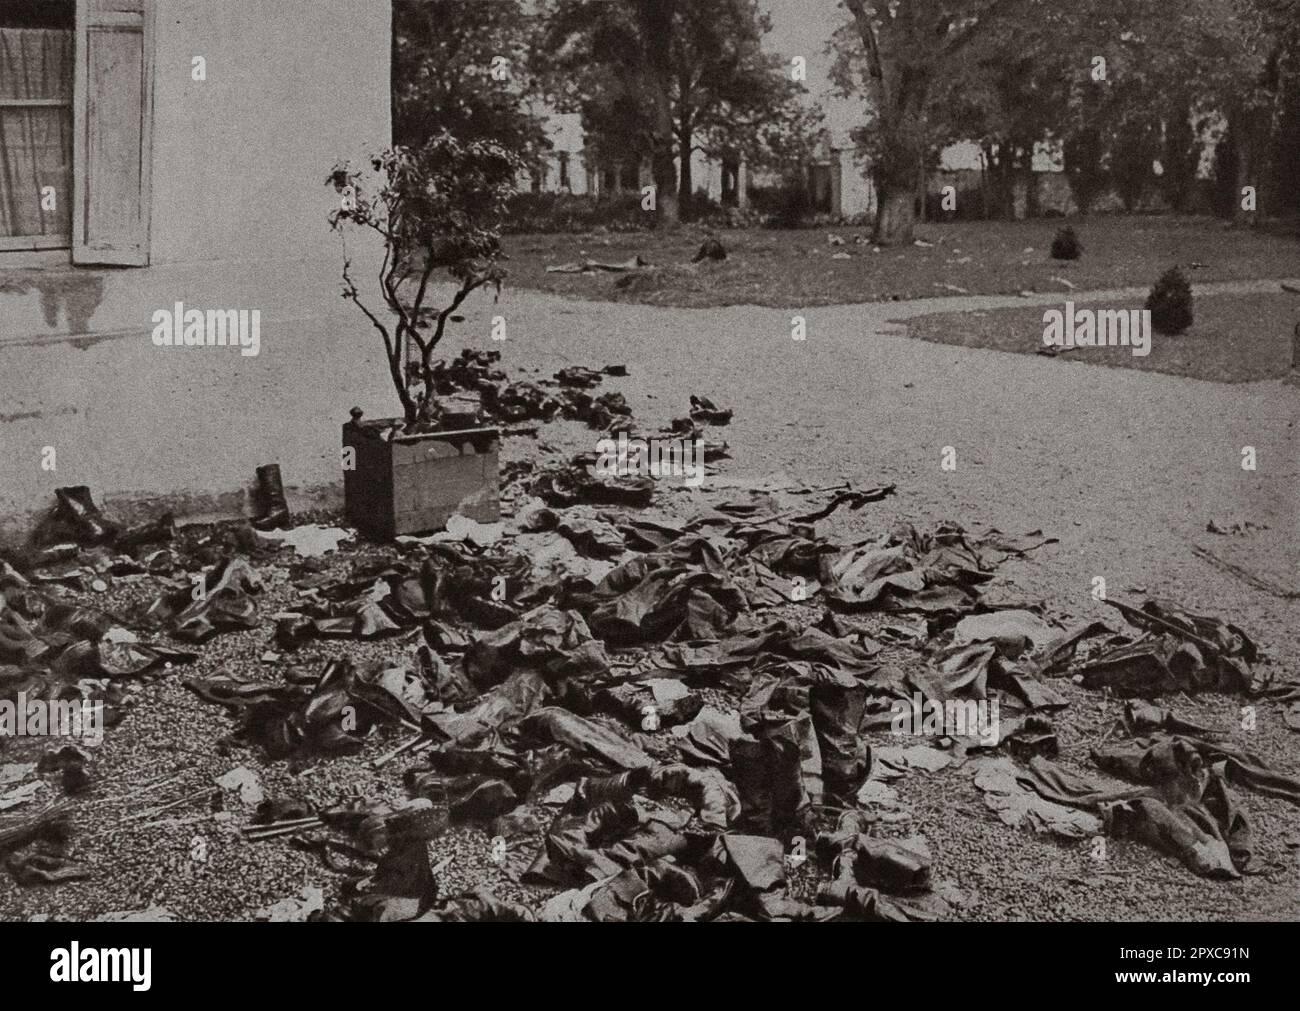 World War I. France at war. 1914 An enemy ambulance was installed at the French castle; the men who died there were buried in the park. Their boots and their soiled belongings litter the floor. Stock Photo